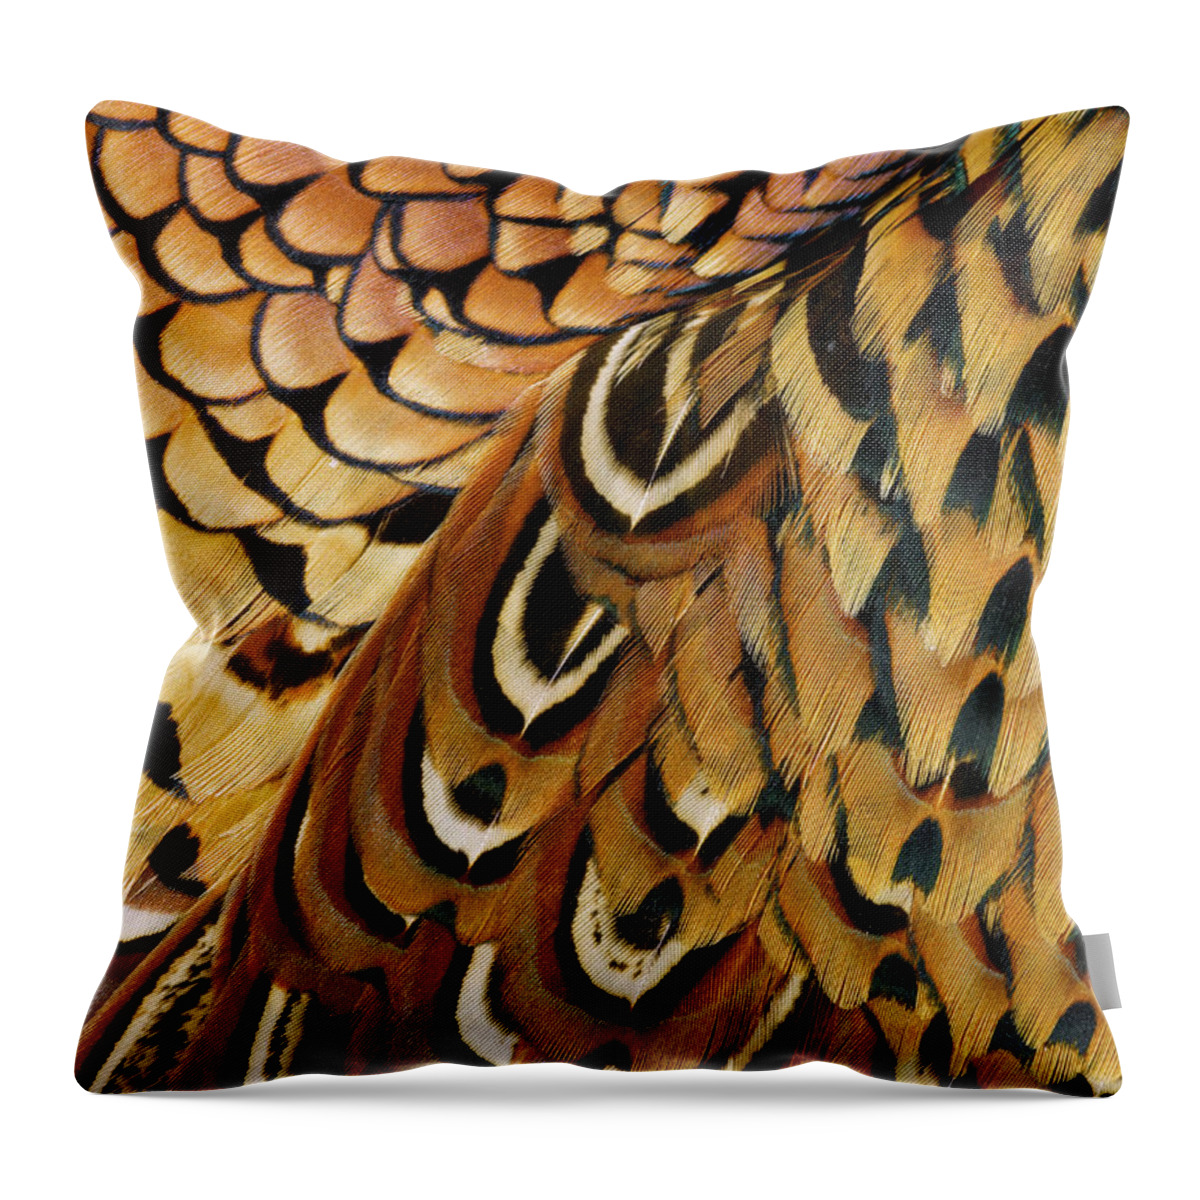 Orange Color Throw Pillow featuring the photograph Detail Of Pheasant Feathers by Jeffrey Coolidge